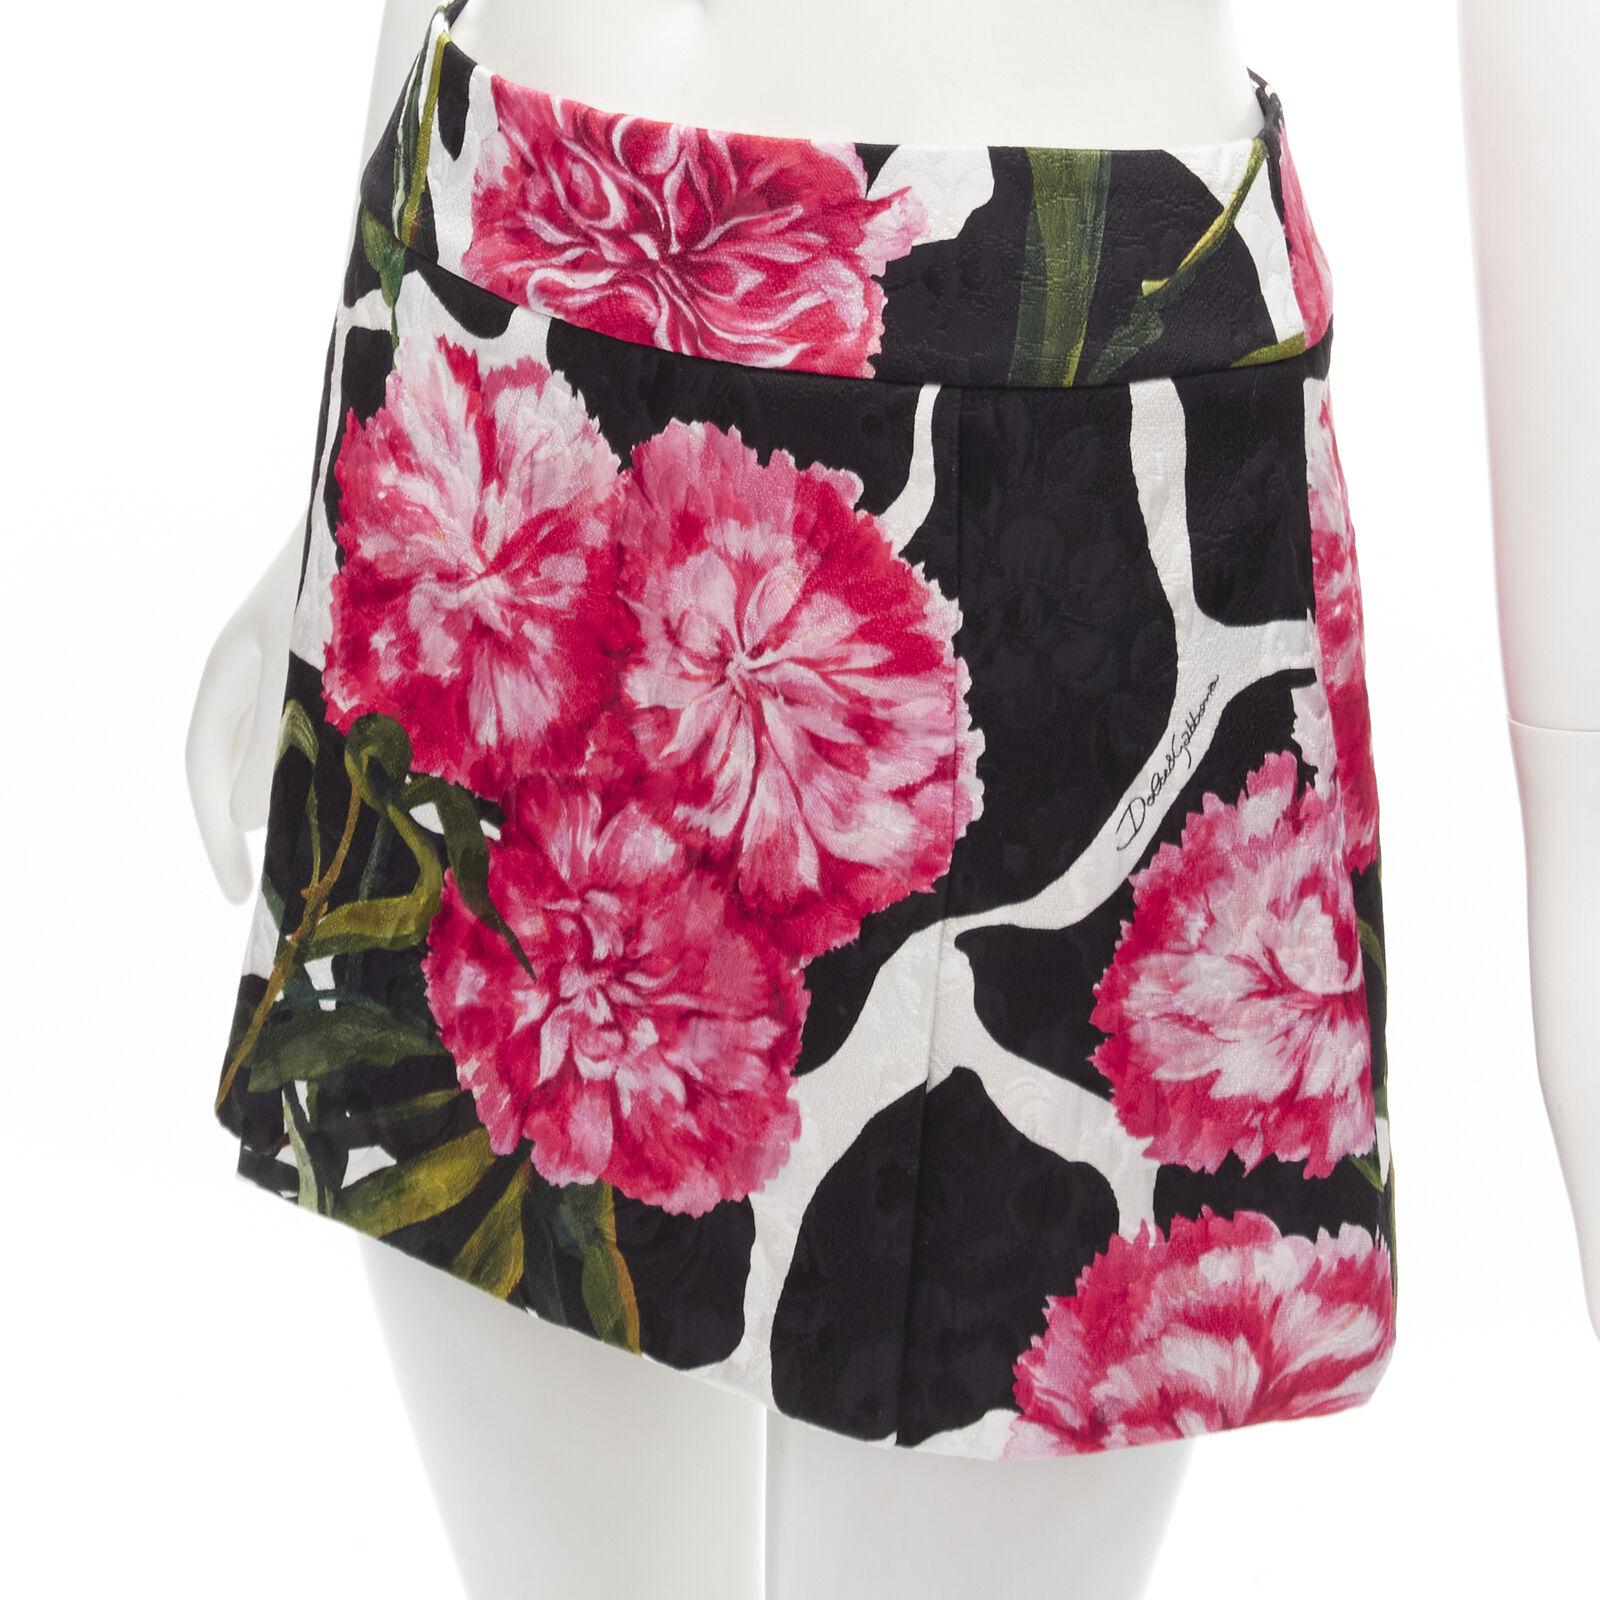 DOLCE GABBANA black pink carnation floral print jacquard mini skirt IT38 XS
Reference: AAWC/A00315
Brand: Dolce Gabbana
Designer: Domenico Dolce and Stefano Gabbana
Material: Cotton, Blend
Color: Multicolour
Pattern: Floral
Closure: Zip
Lining: